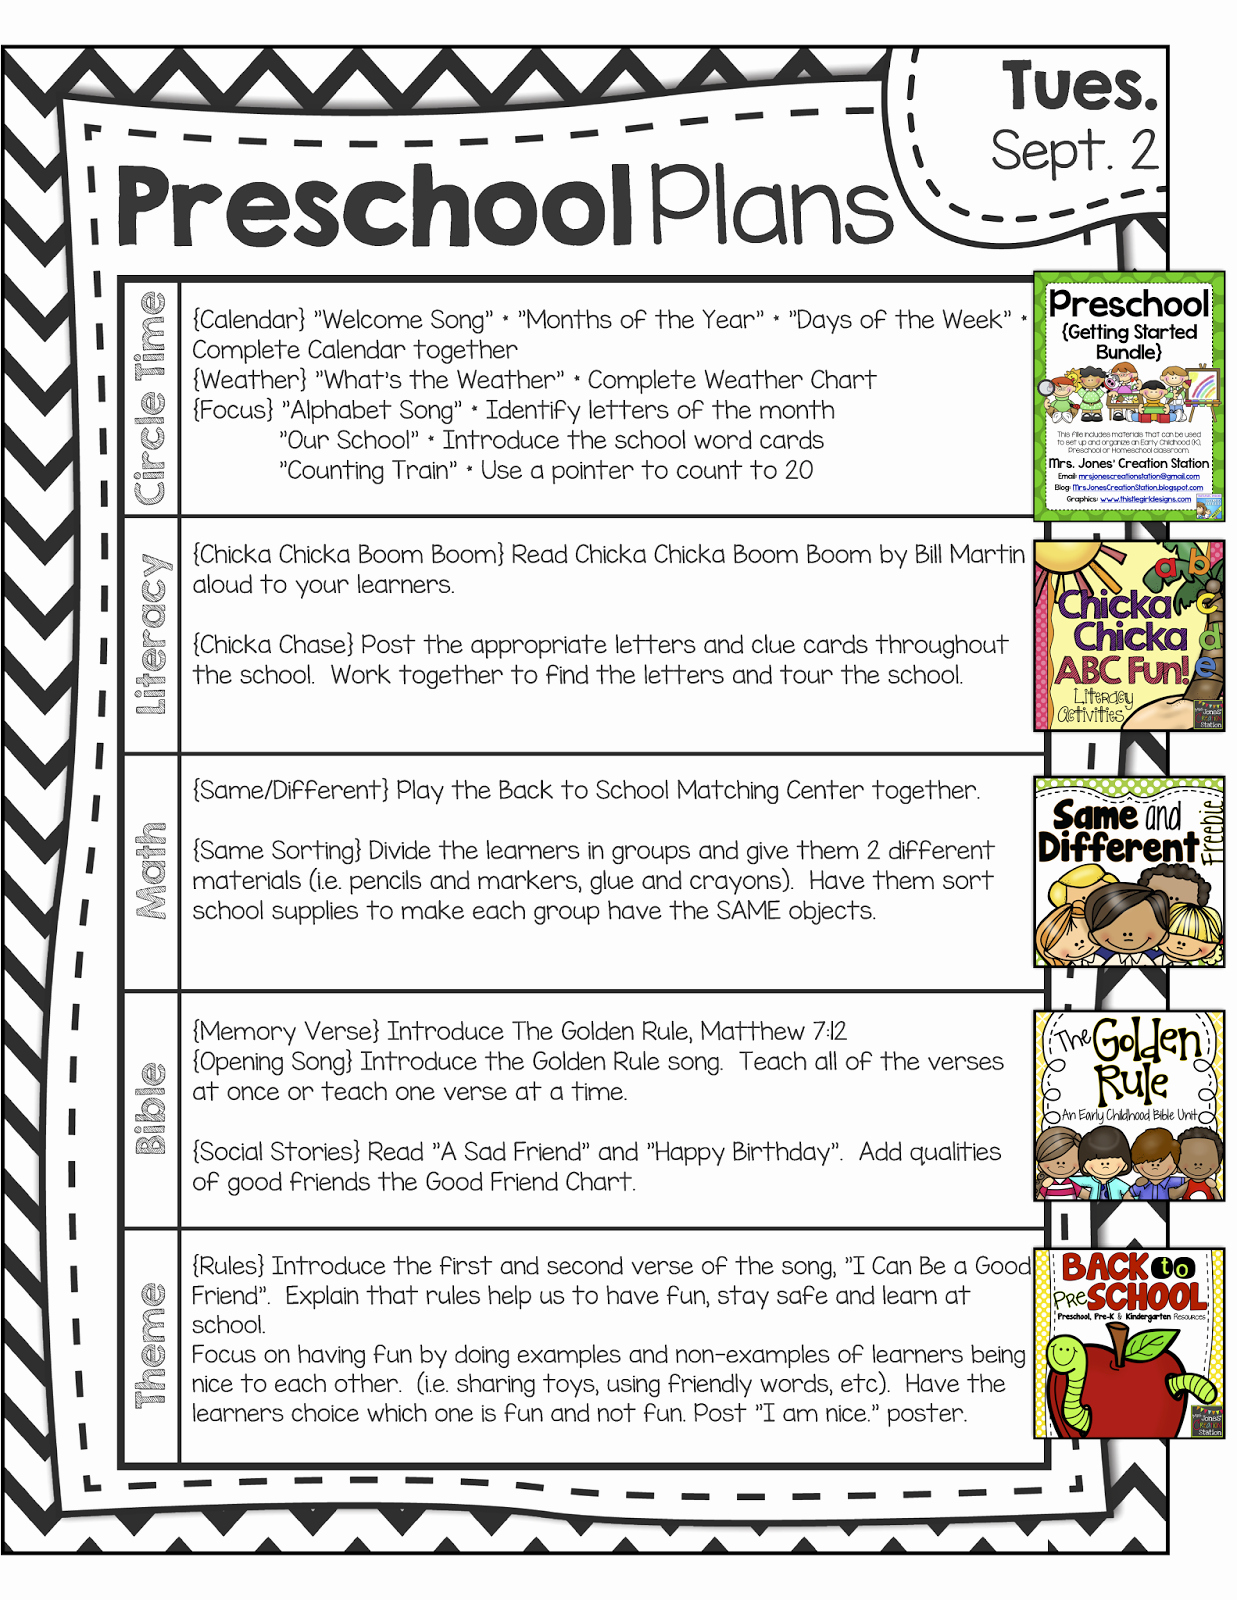 Pre Kindergarten Lesson Plan Template New Windows 10 Product Activation Keys All Versions